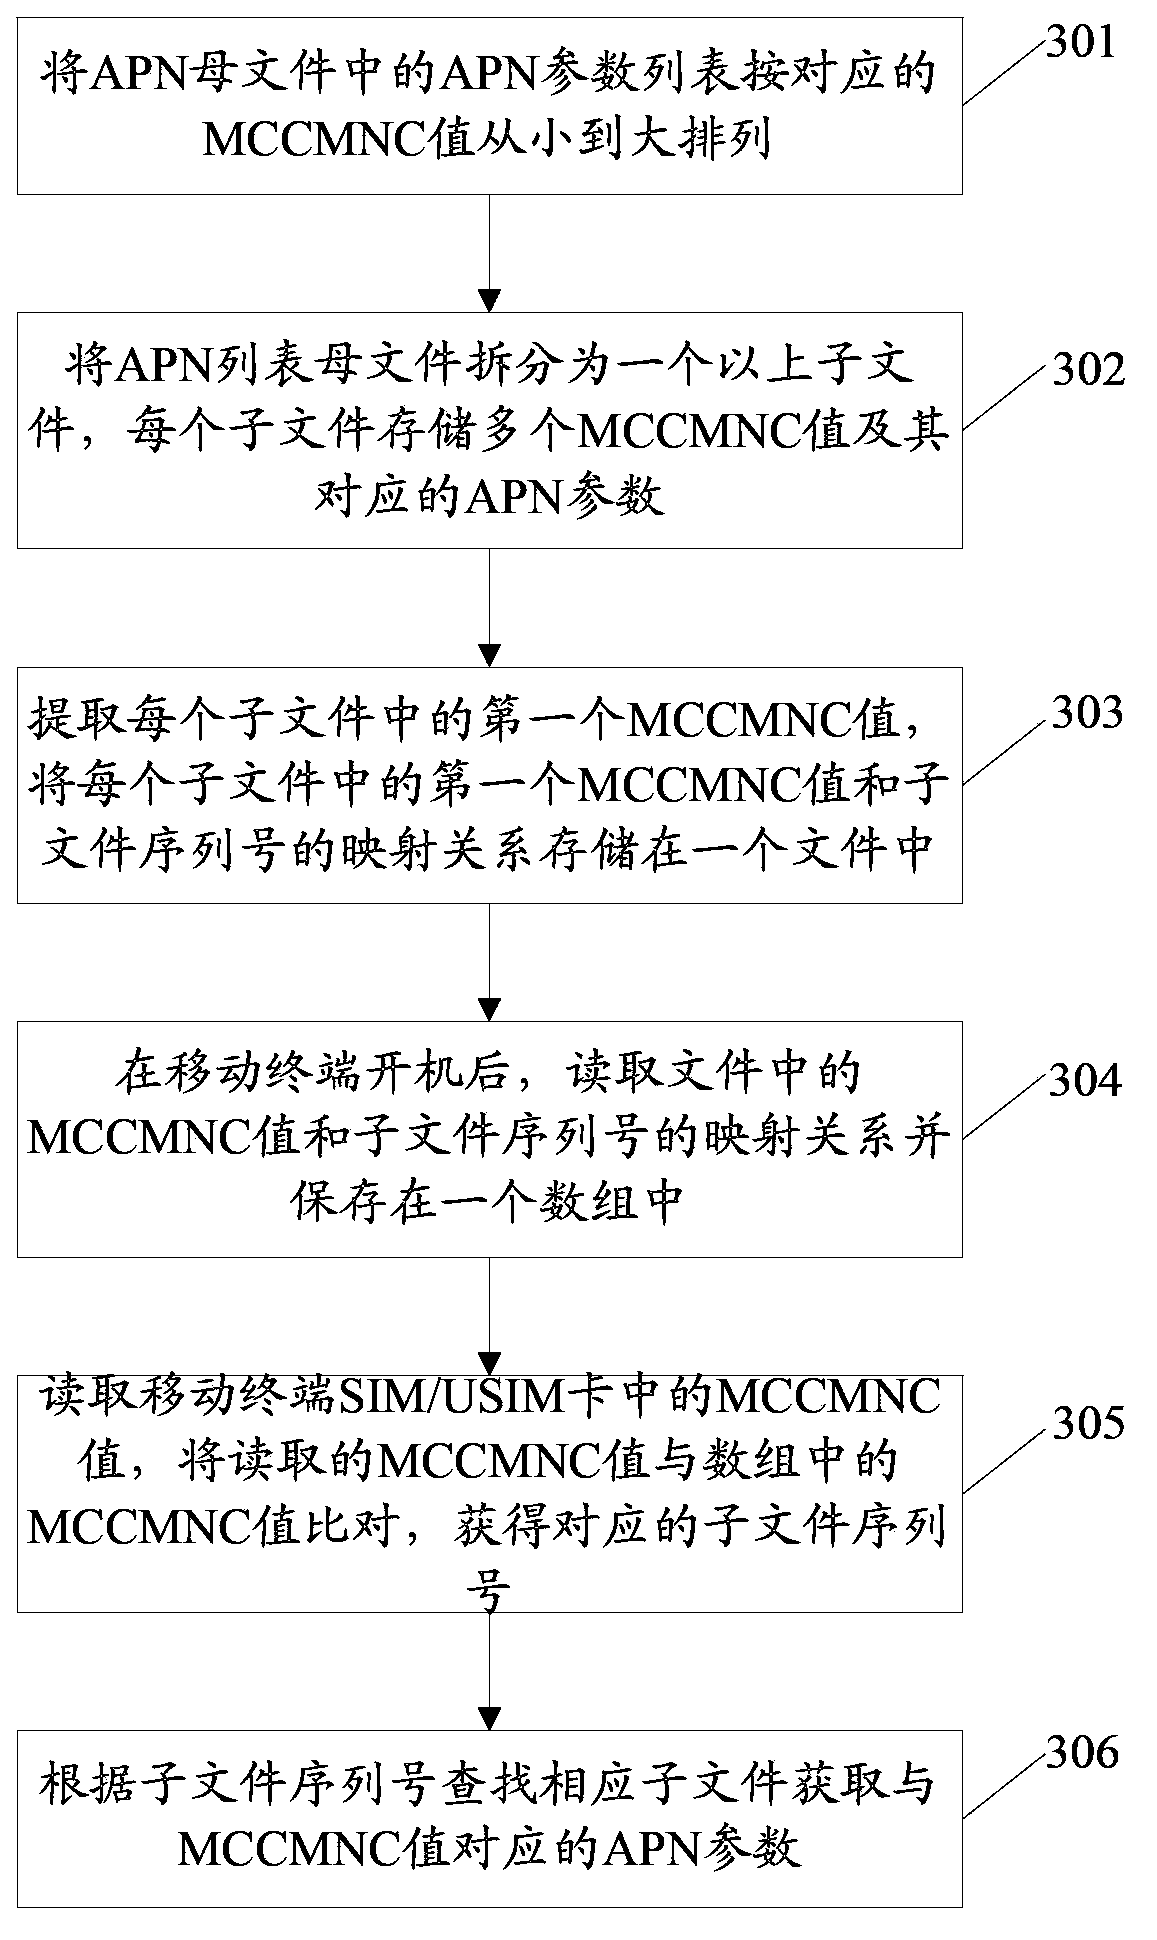 Method and device for automatically configuring and updating access point name parameters